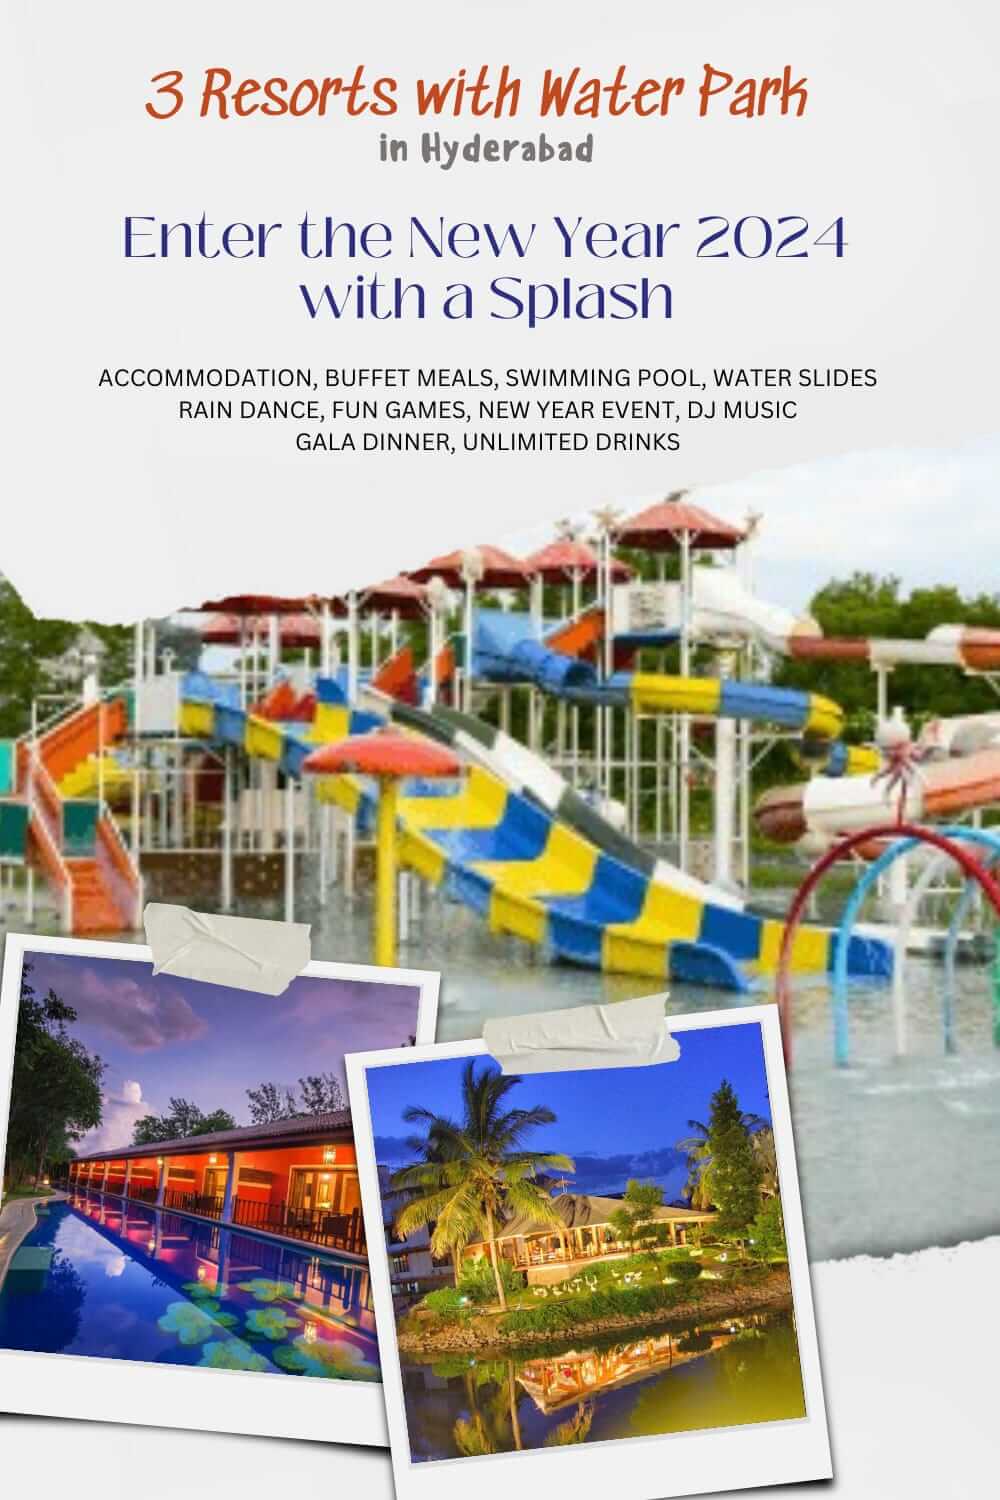 Here are the 3 best resorts with water park for New Year party in Hyderabad where you can enjoy the water slides during the day and attend a party at night.